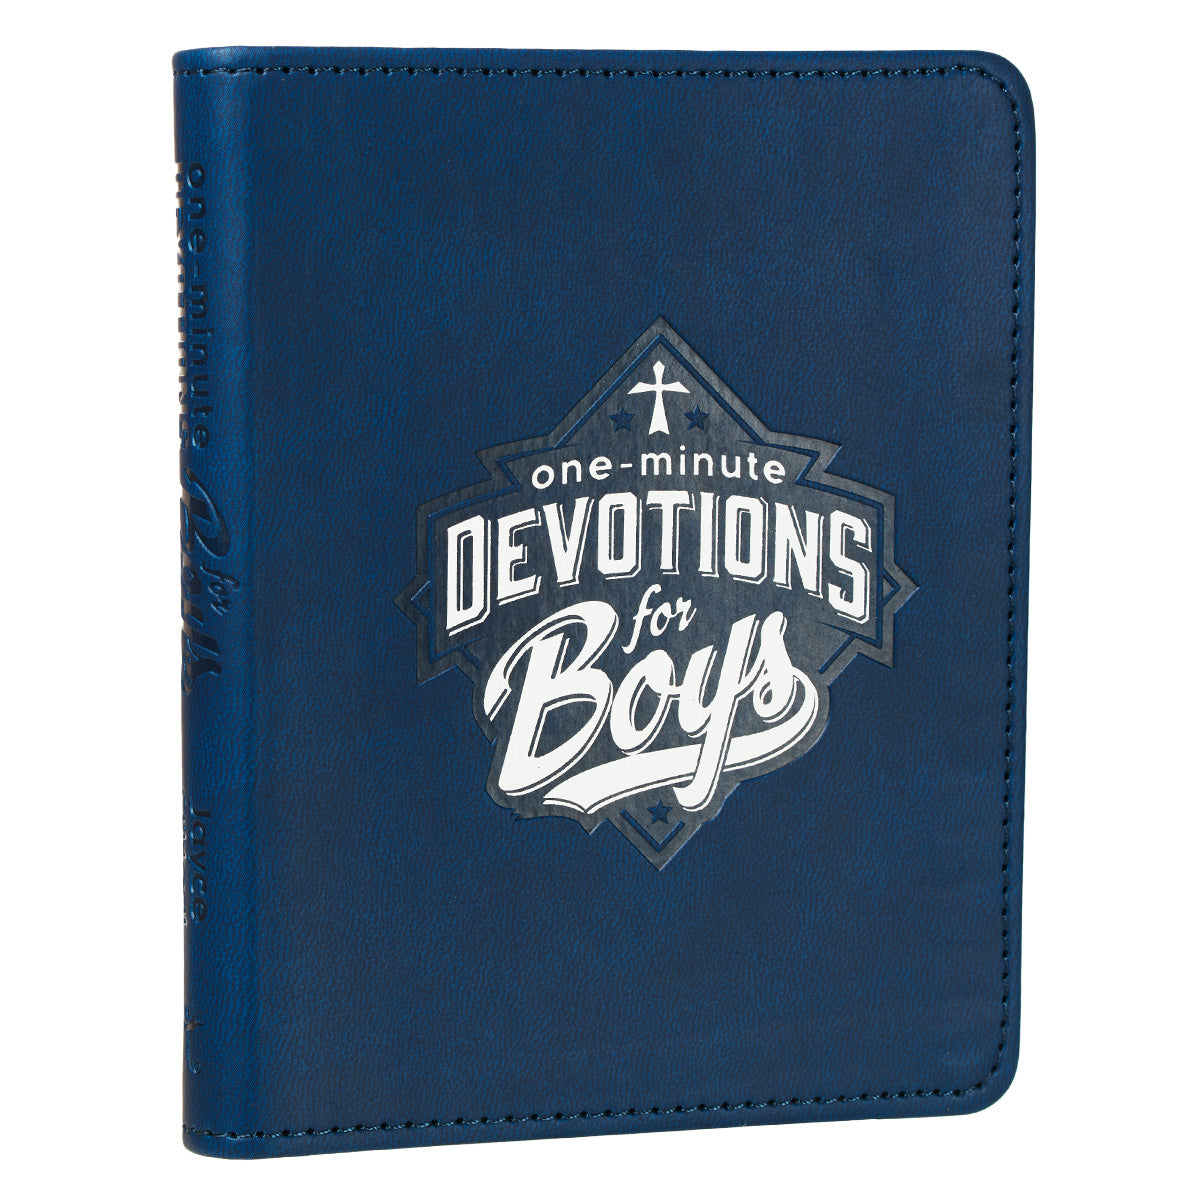 One-Minute Devotions for Boys Blue Faux Leather Devotional - The Christian Gift Company